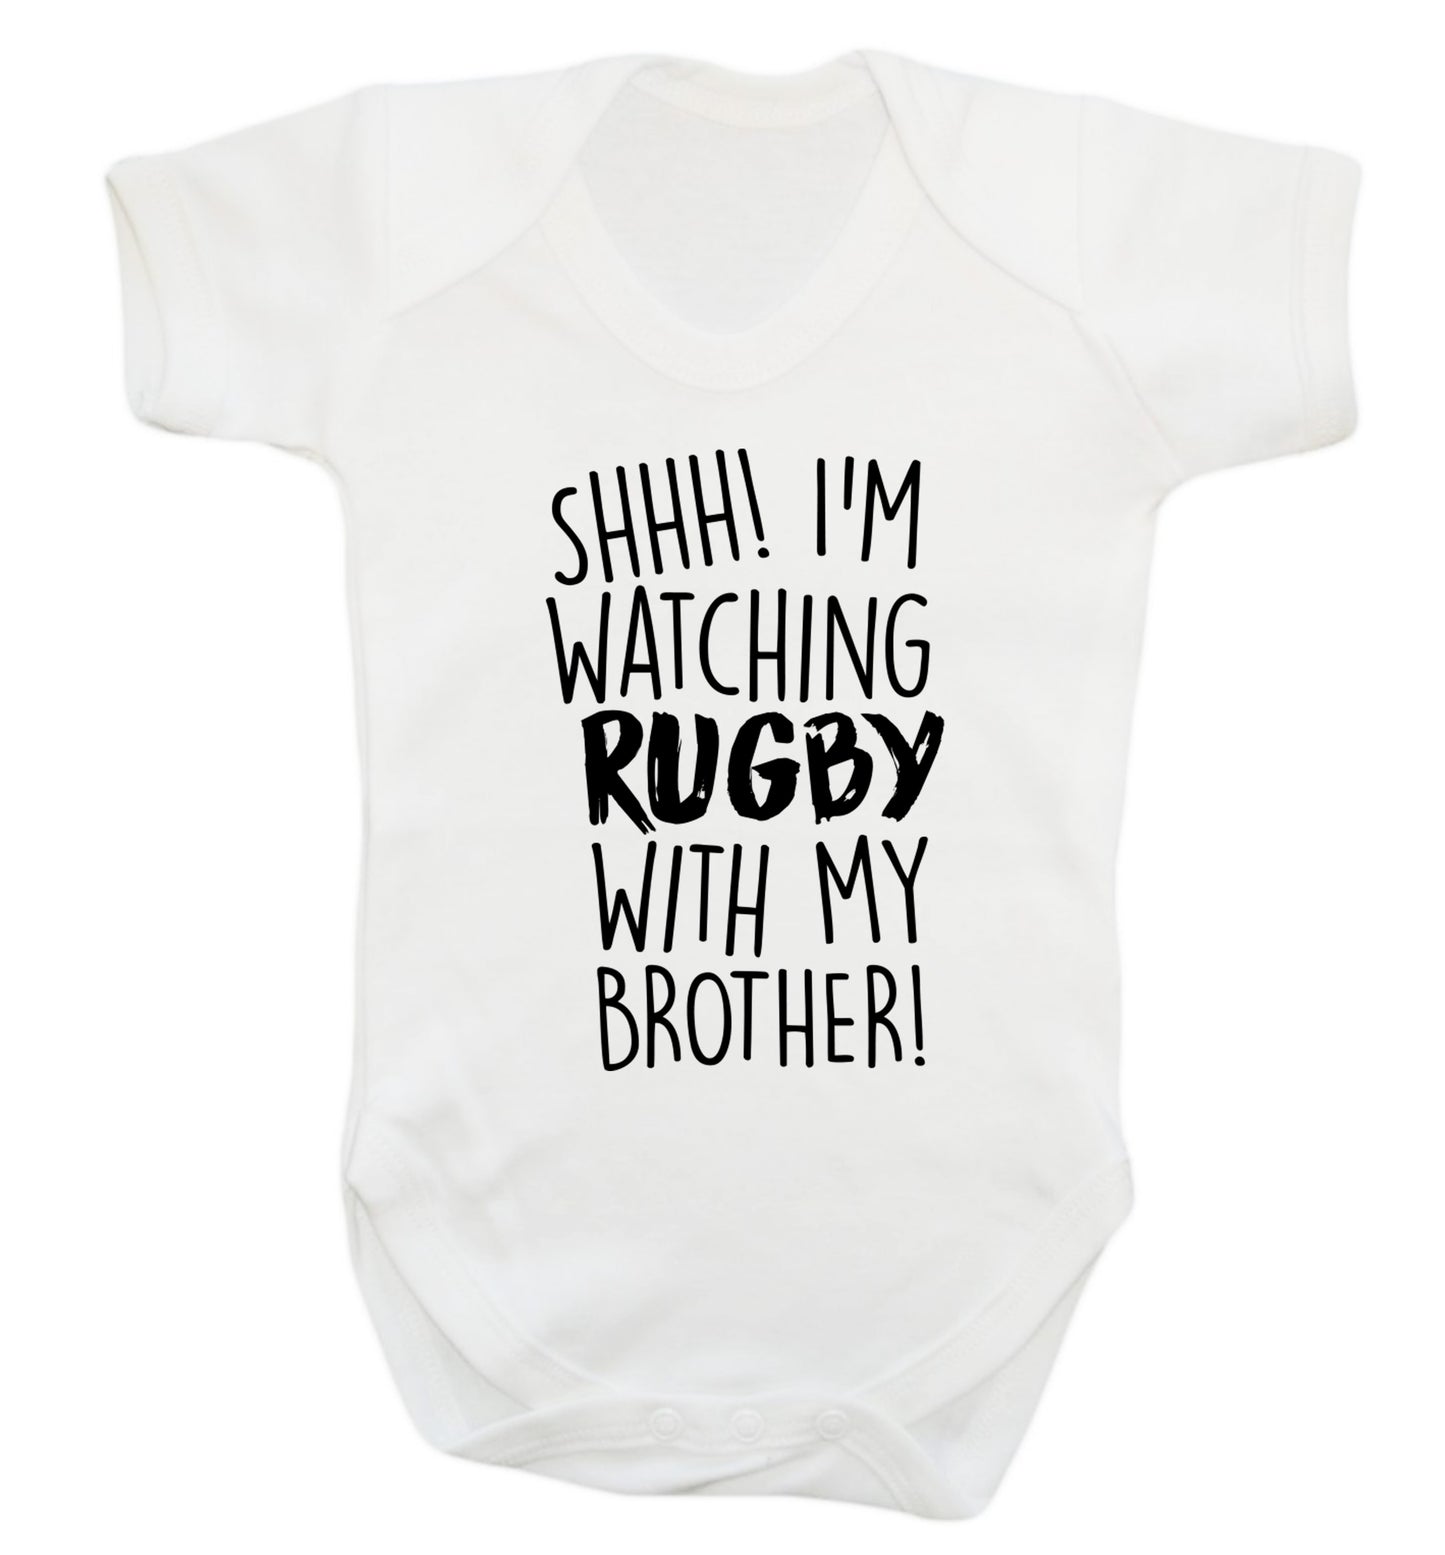 Shh... I'm watching rugby with my brother Baby Vest white 18-24 months